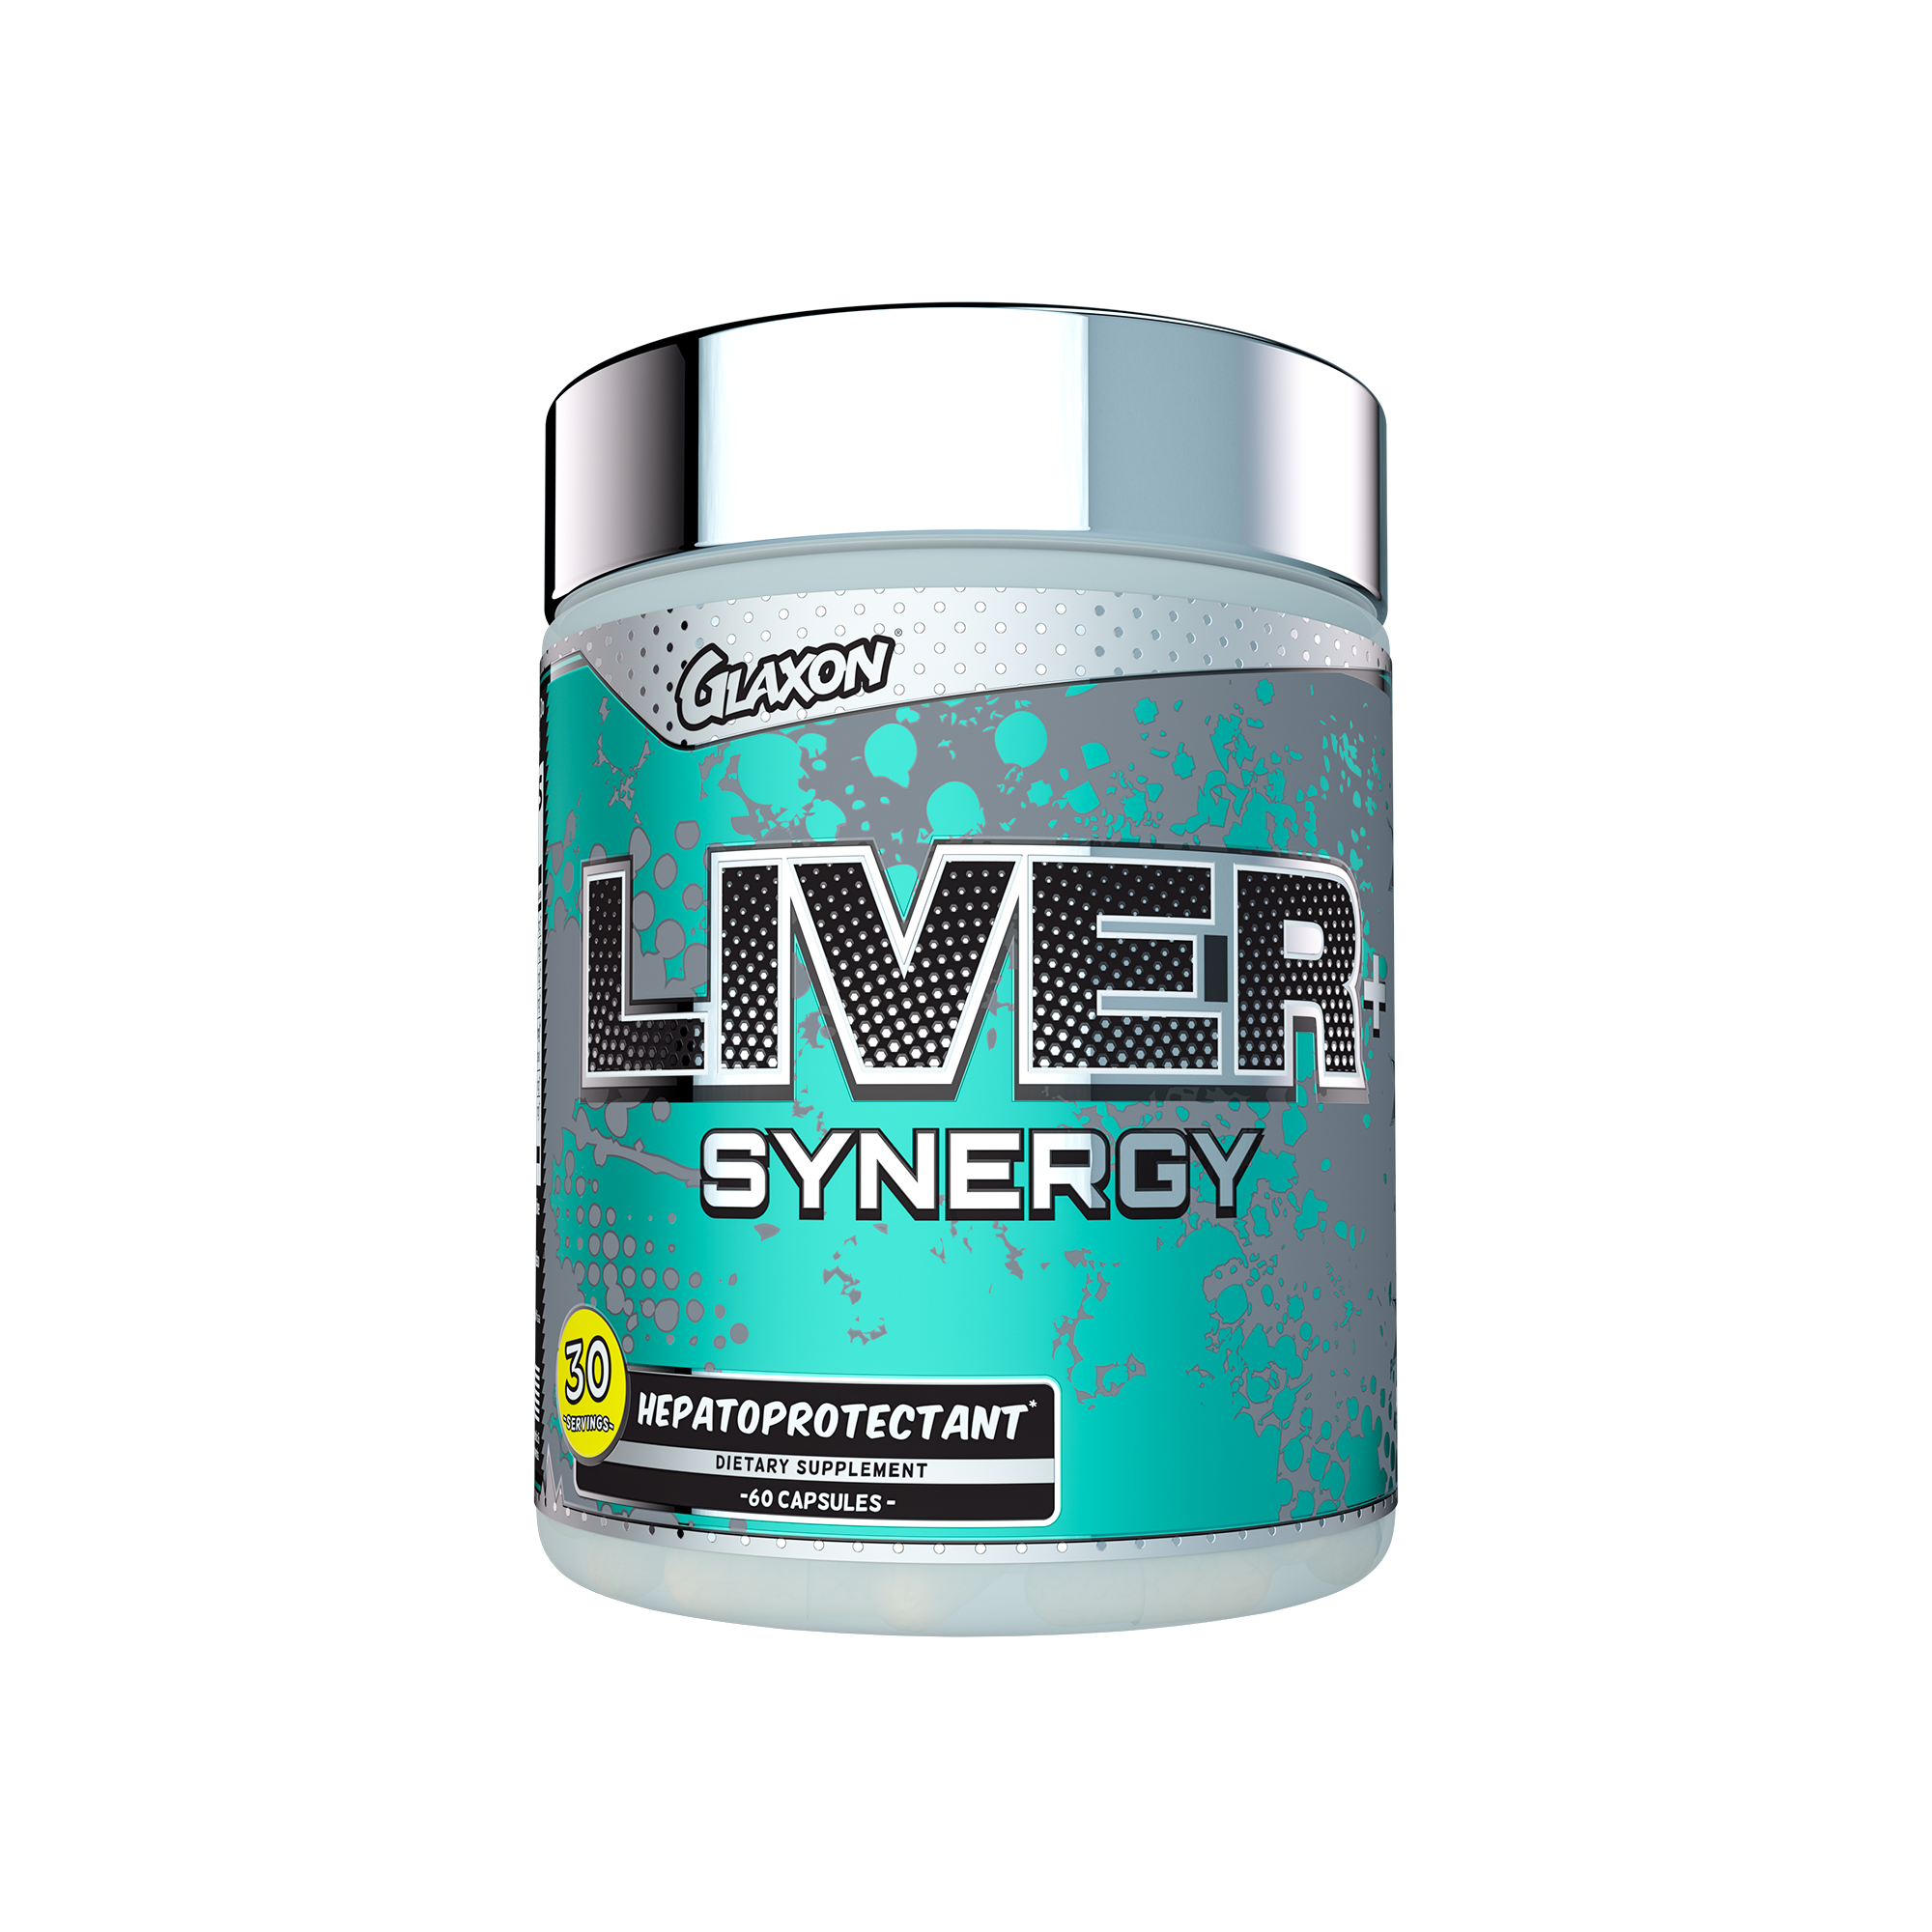 Glaxon Liver+ Synergy - Healthy Liver